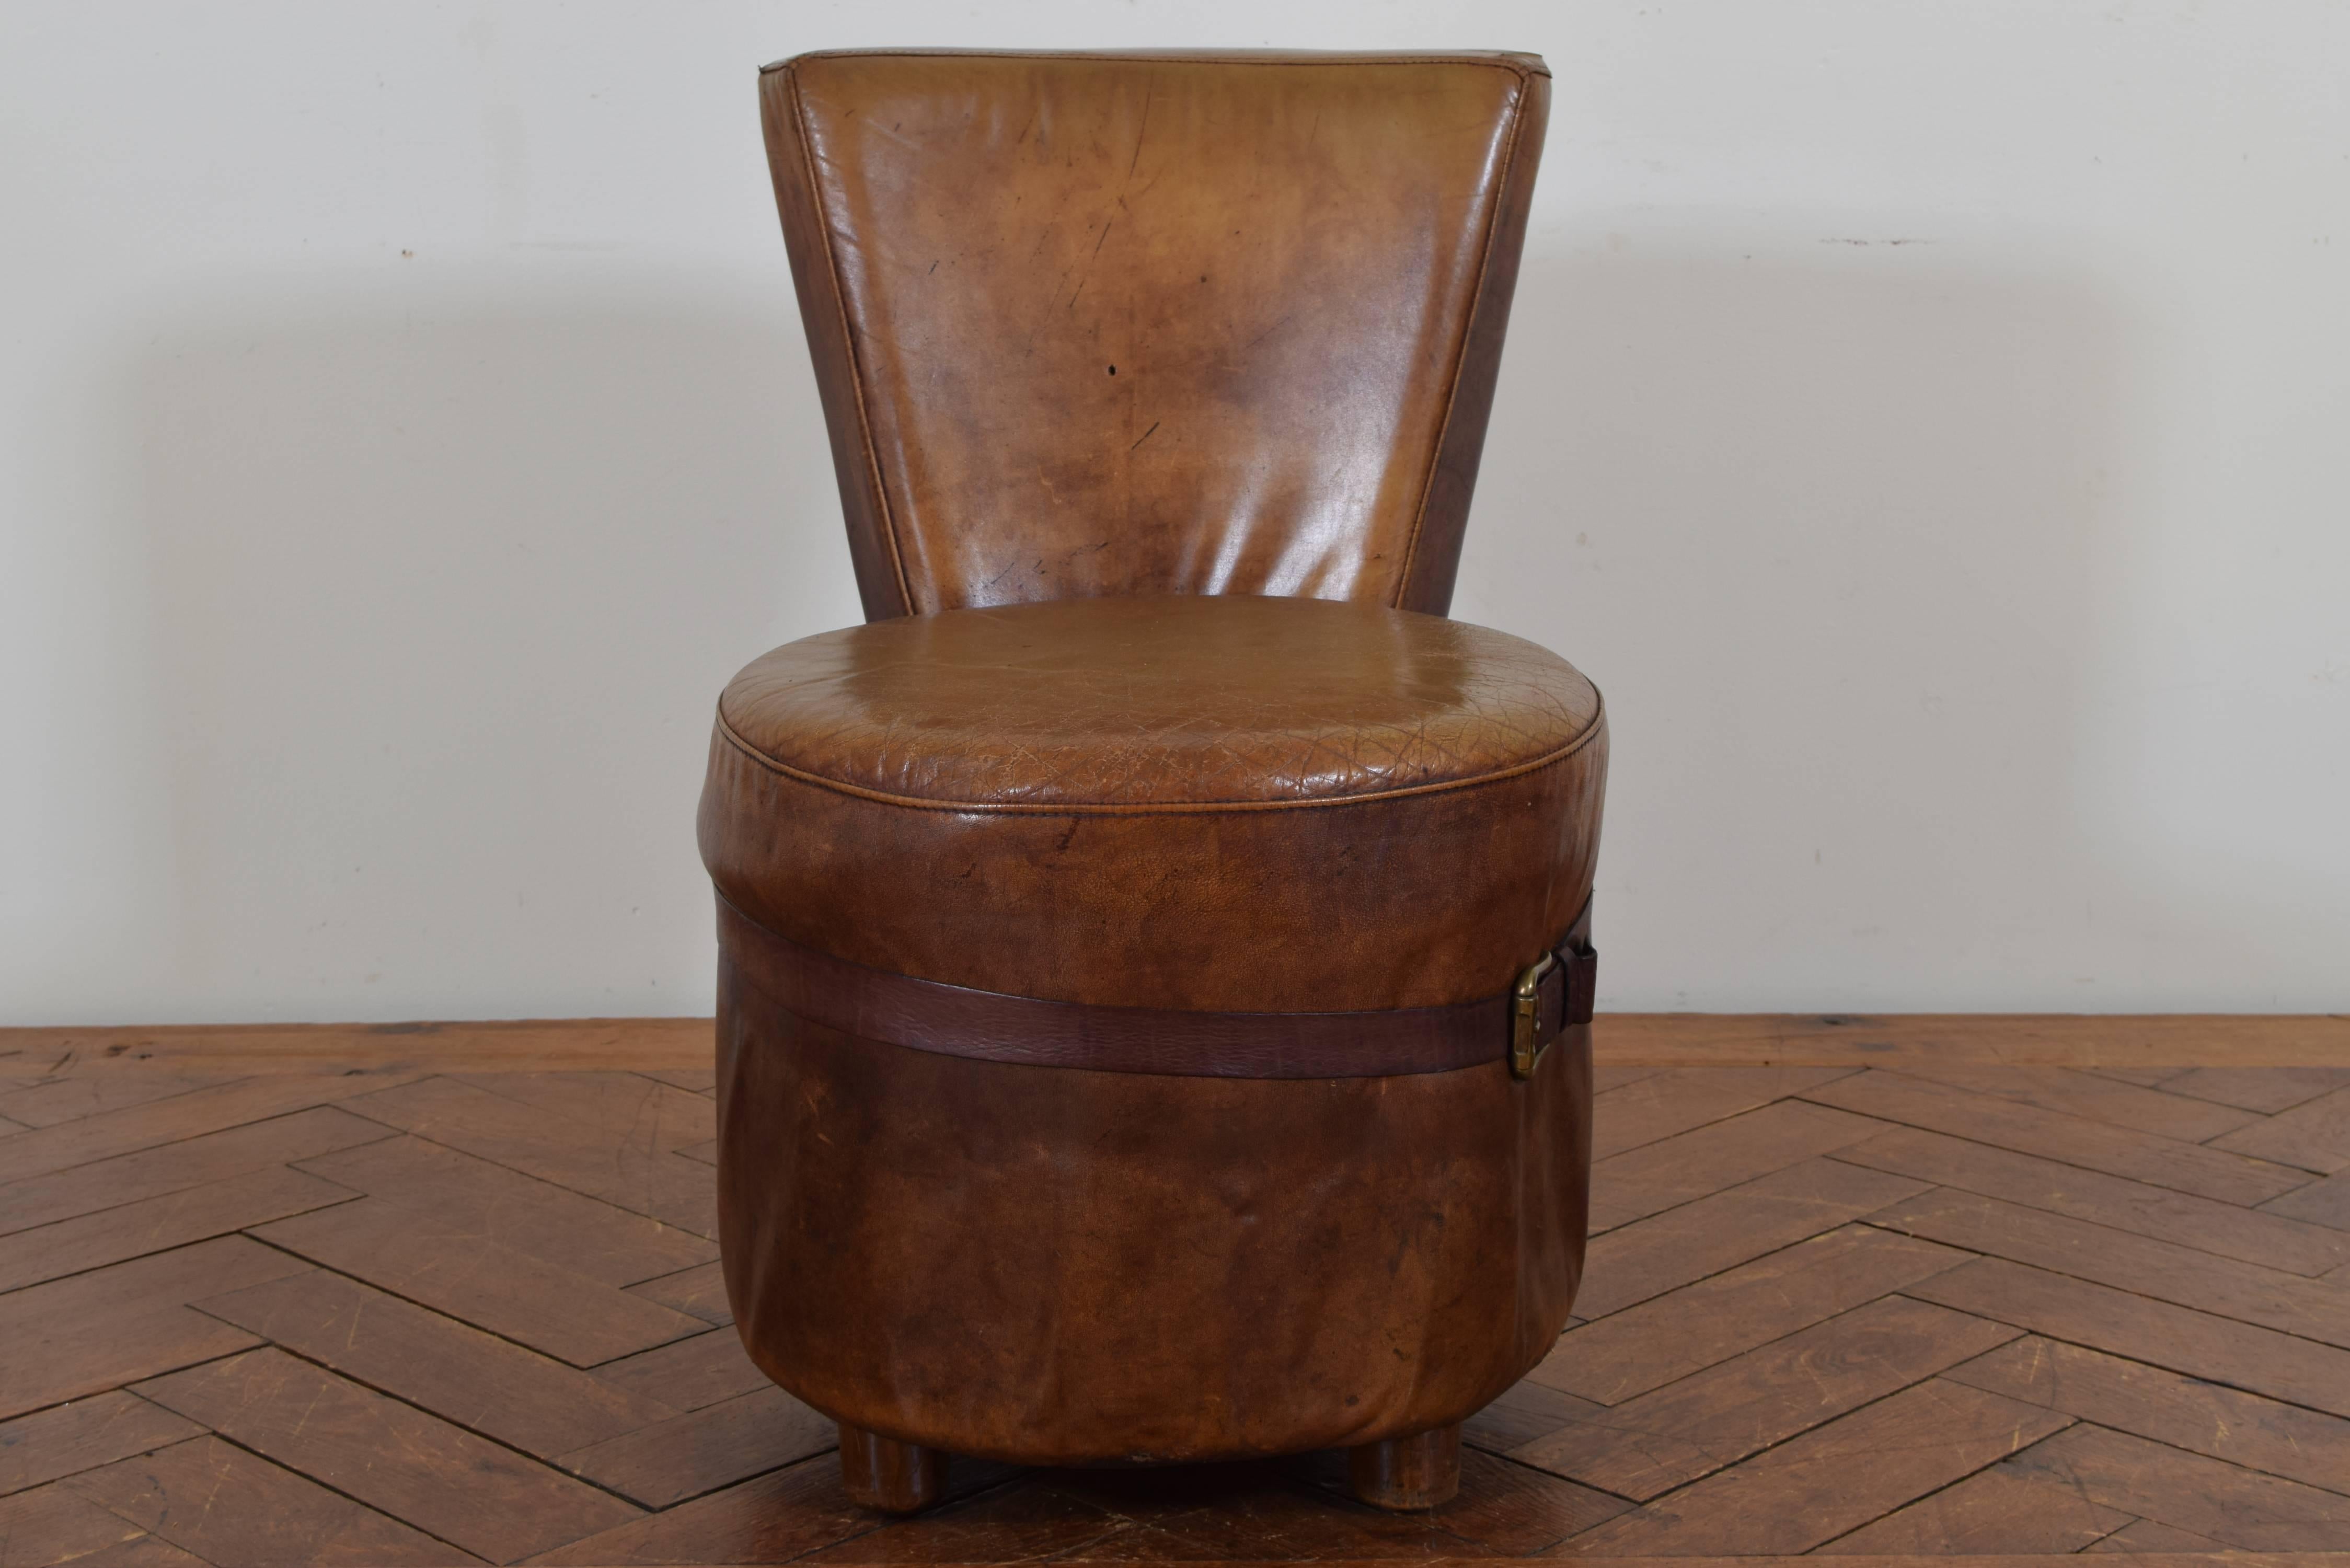 The v-shaped backrest is concave and trimmed in brass nailheads, the seat portion essentially a round poof and decorated with a leather belt inscribed 